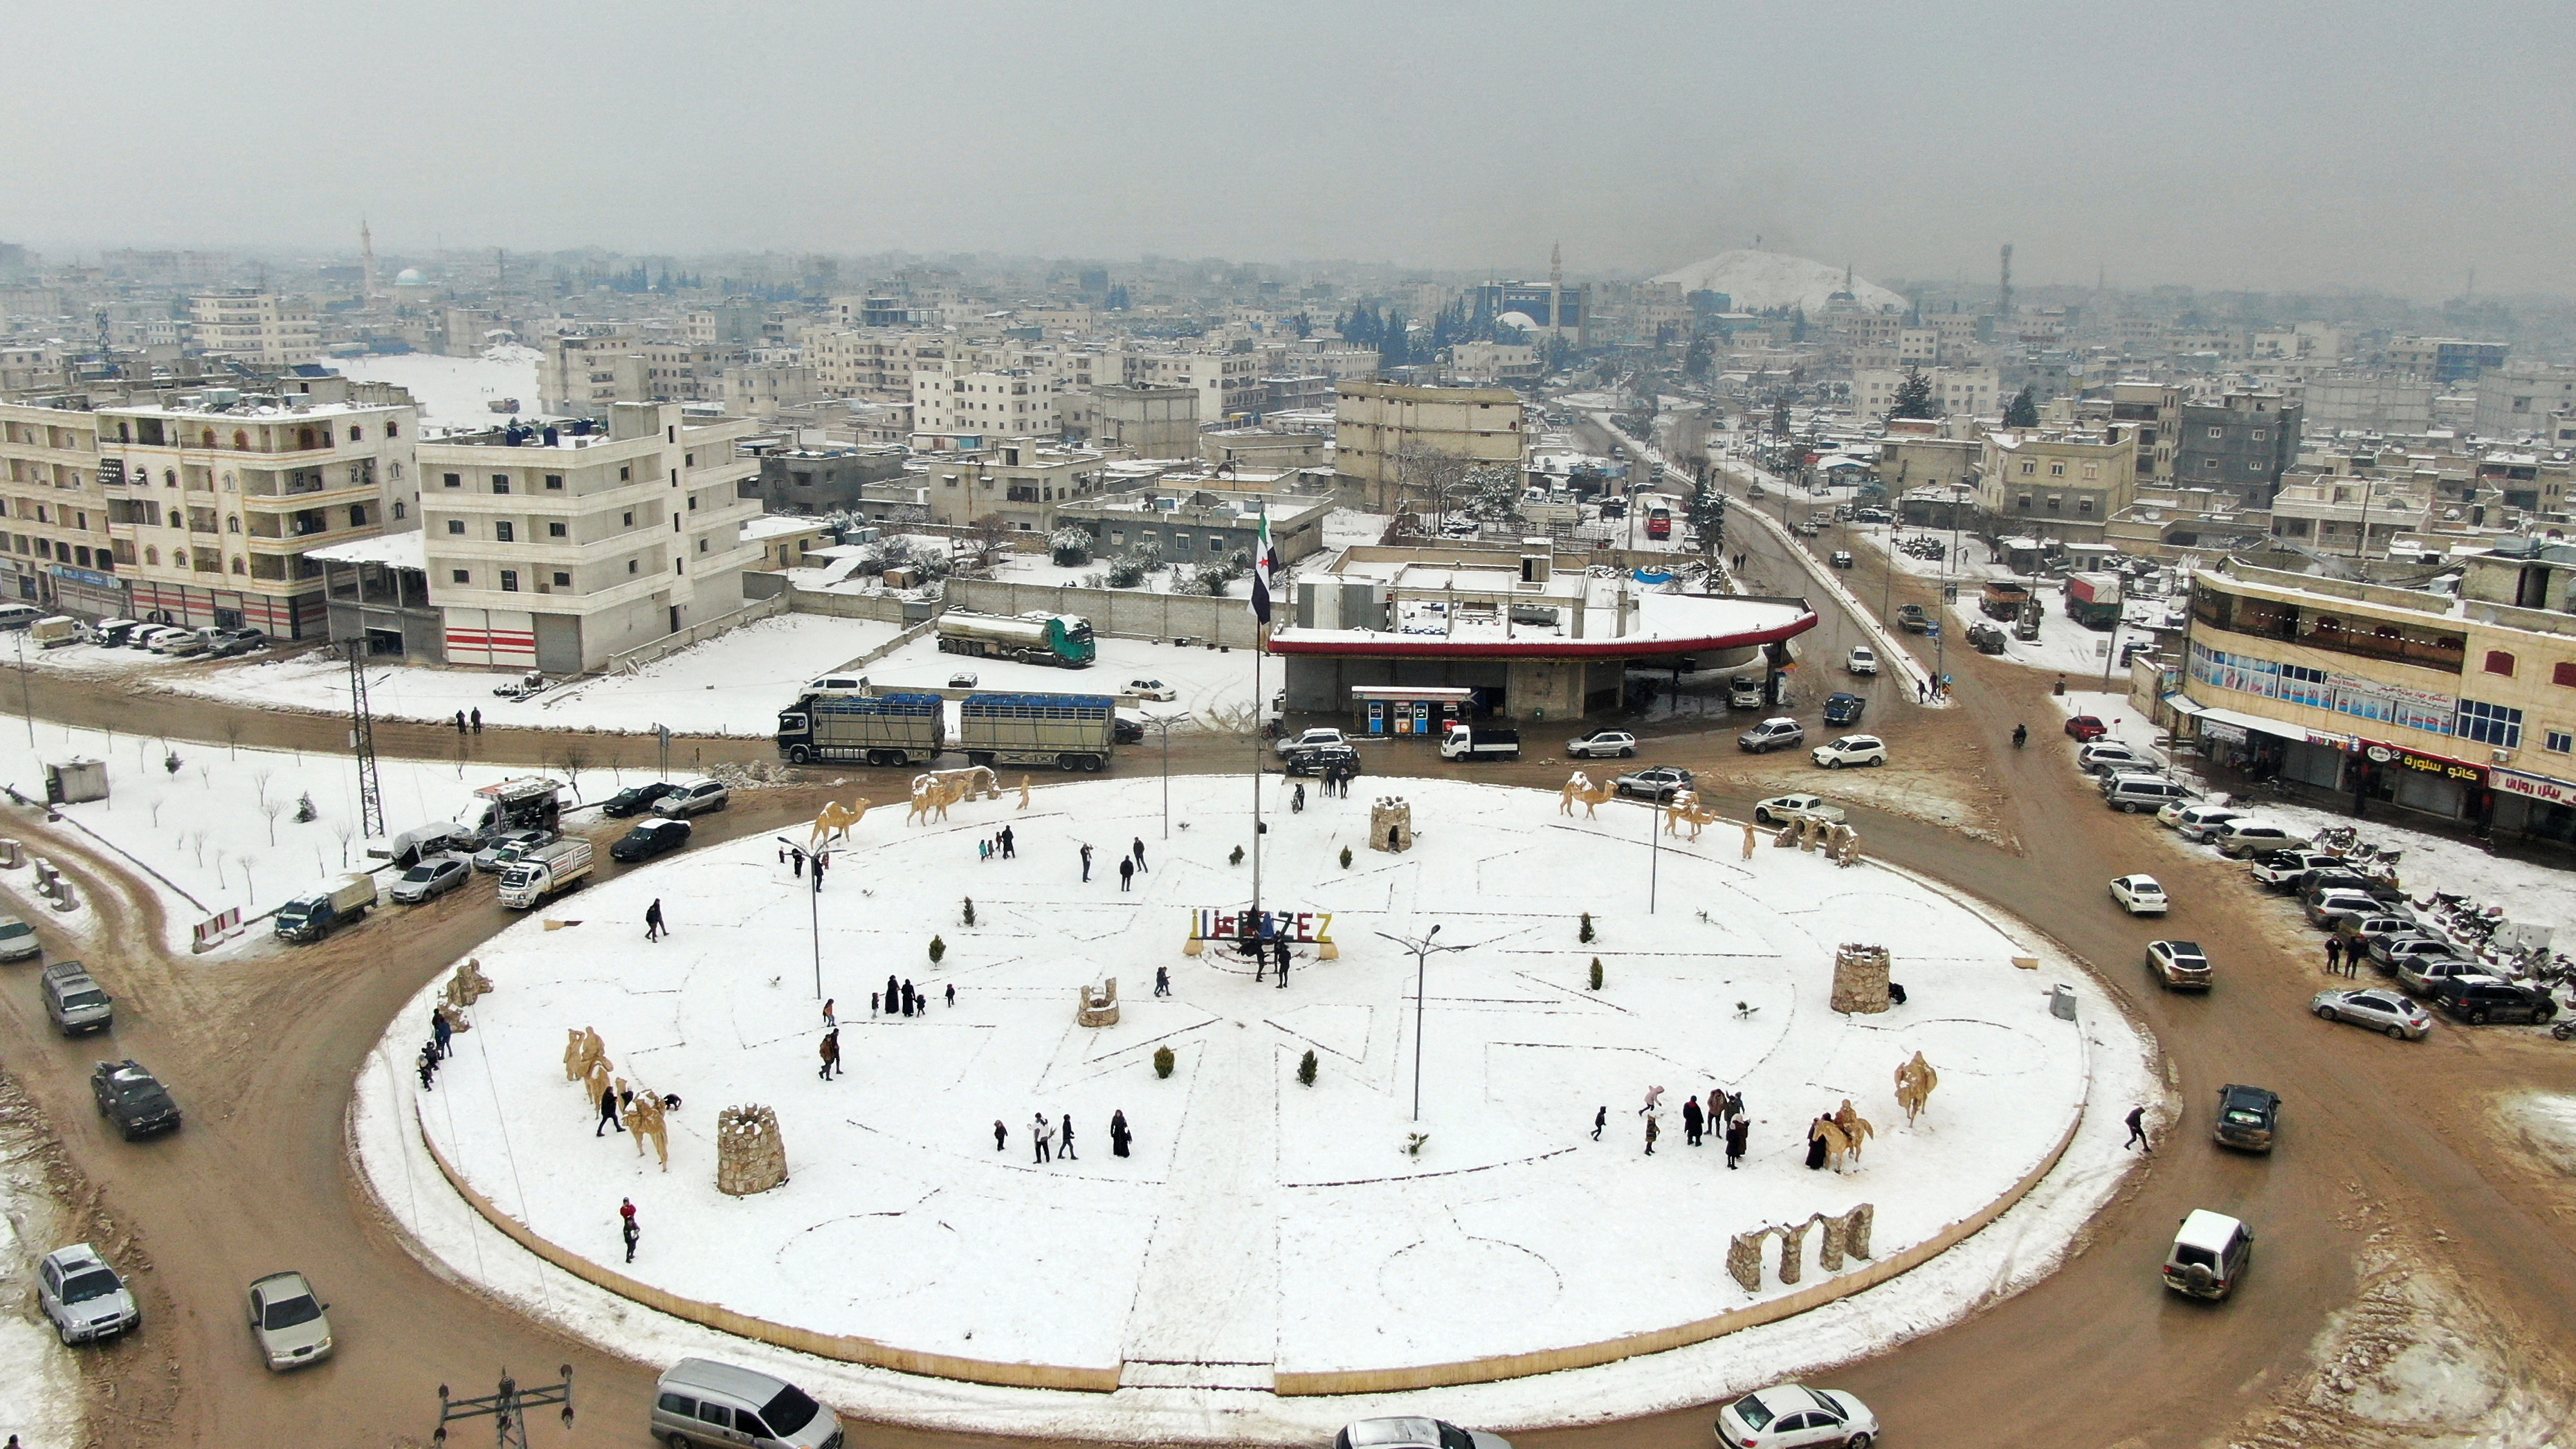 An aerial view shows the snow covered city of Azaz